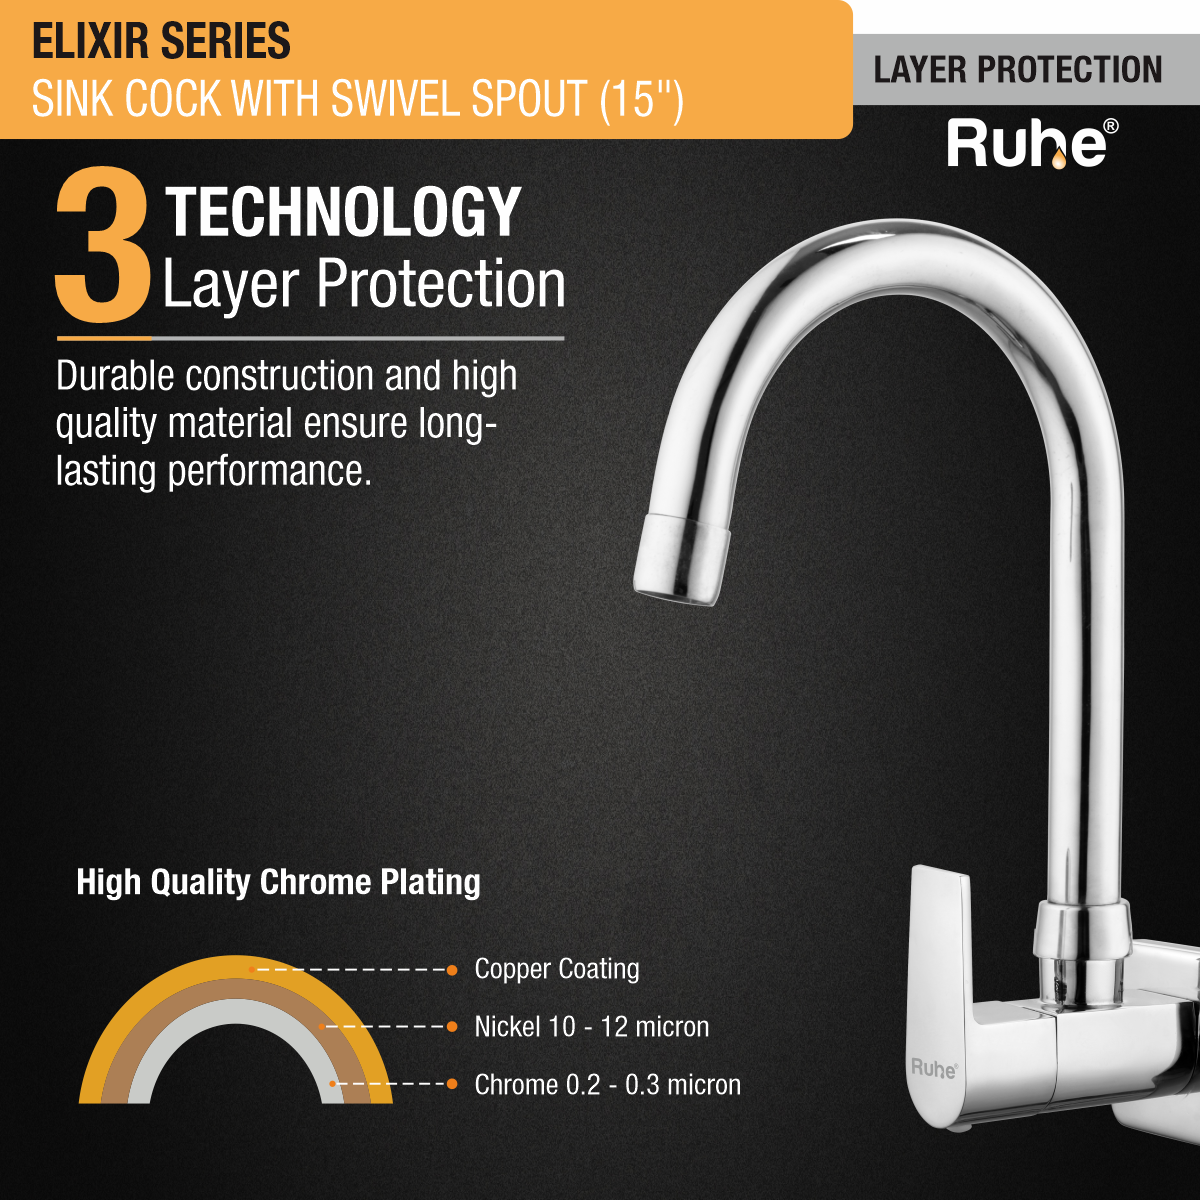 Elixir Sink Tap with Medium (15 inches) Round Swivel Spout Faucet 3 layer protection